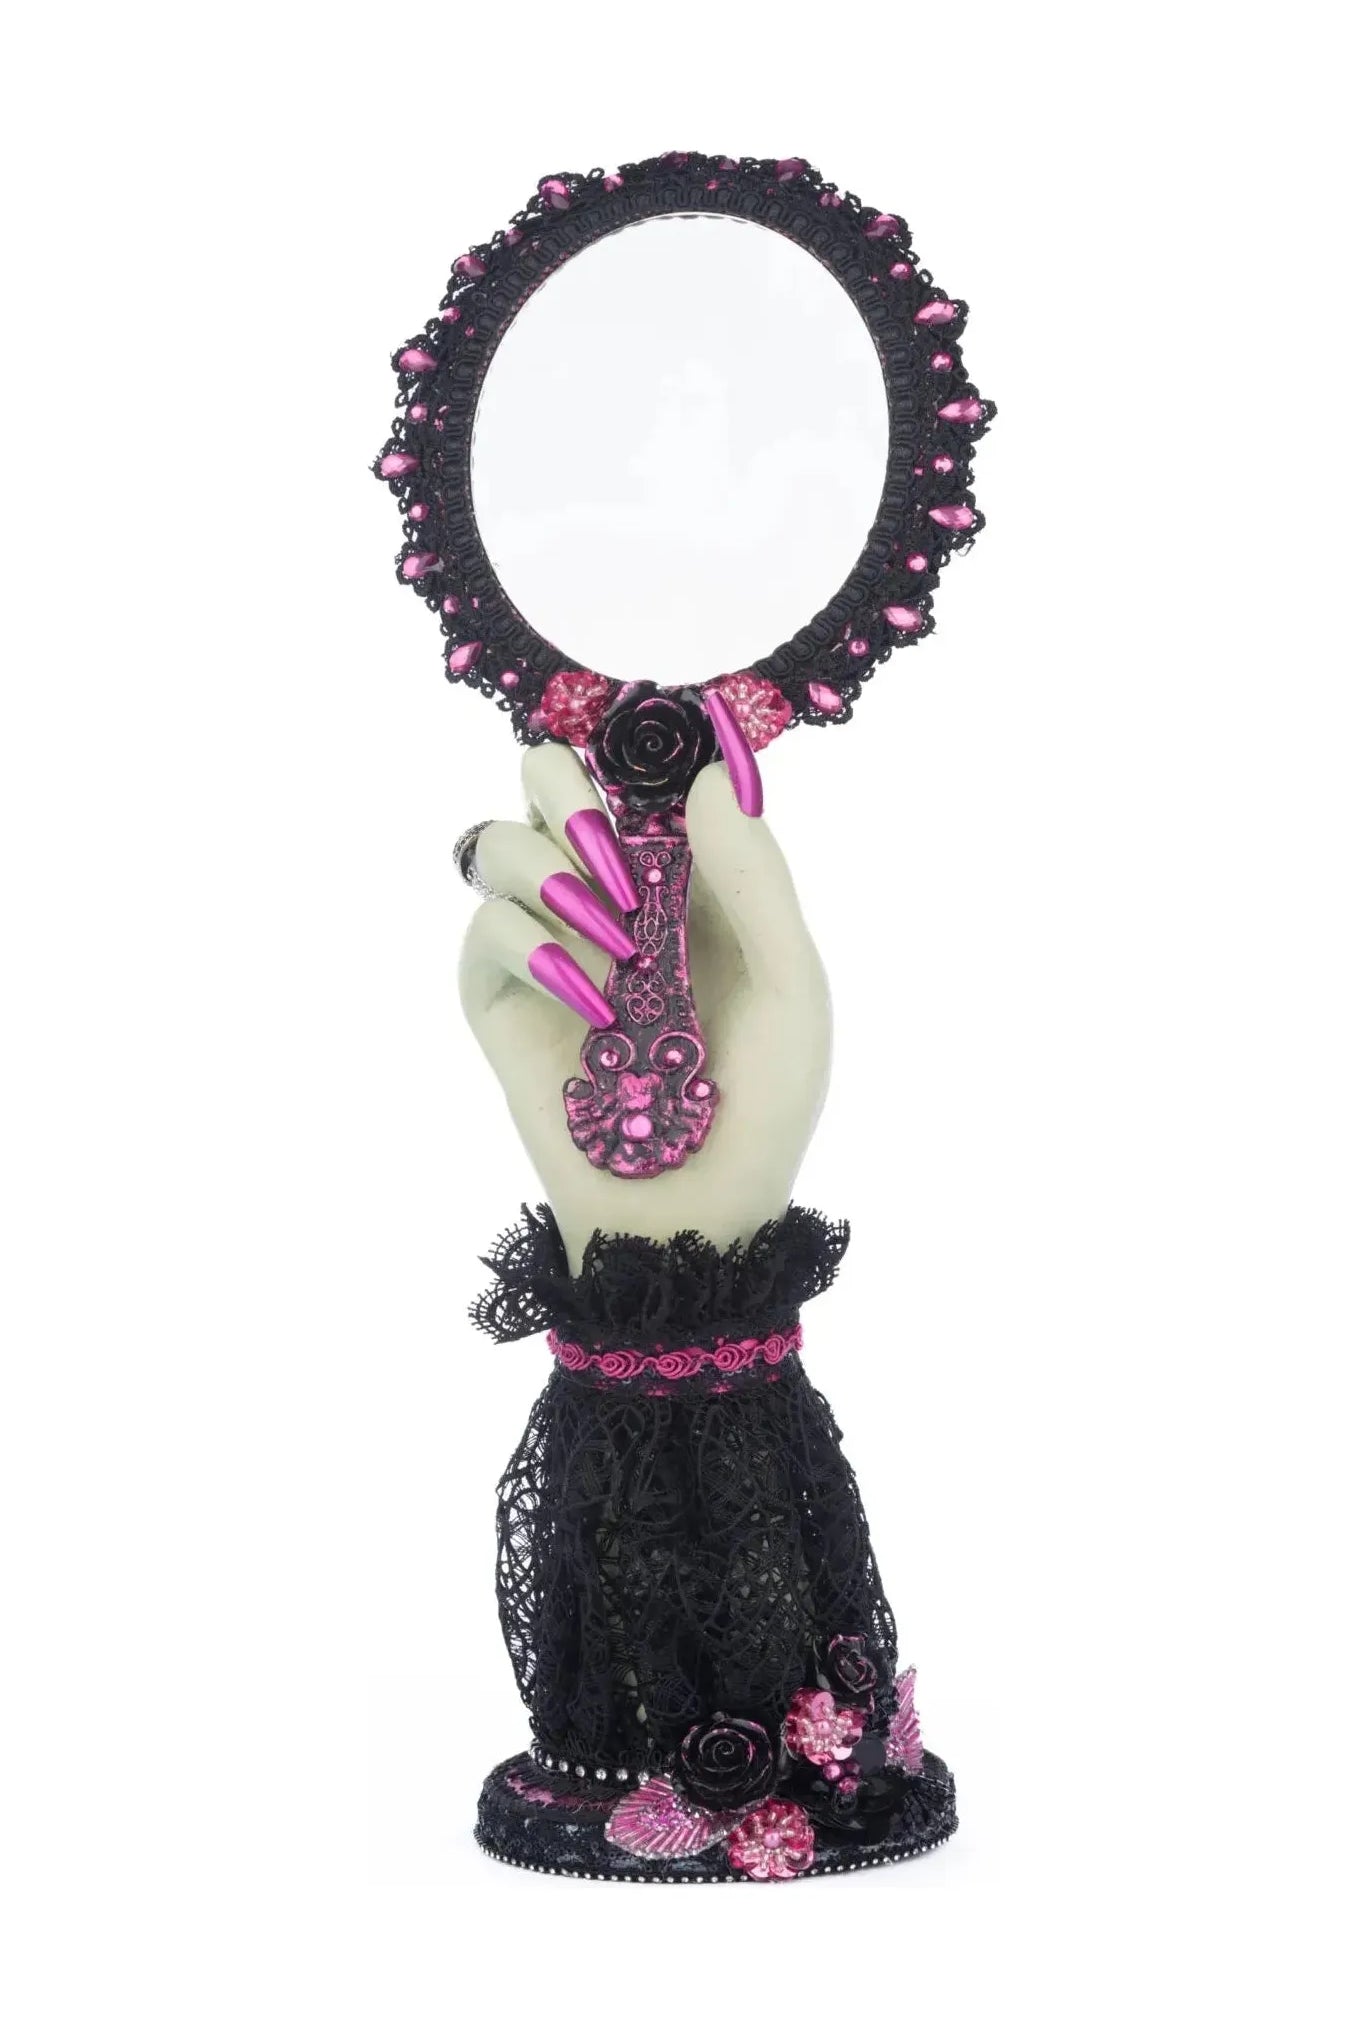 Shop For Pink Panic Hand Held Mirror with Hand 28-428401